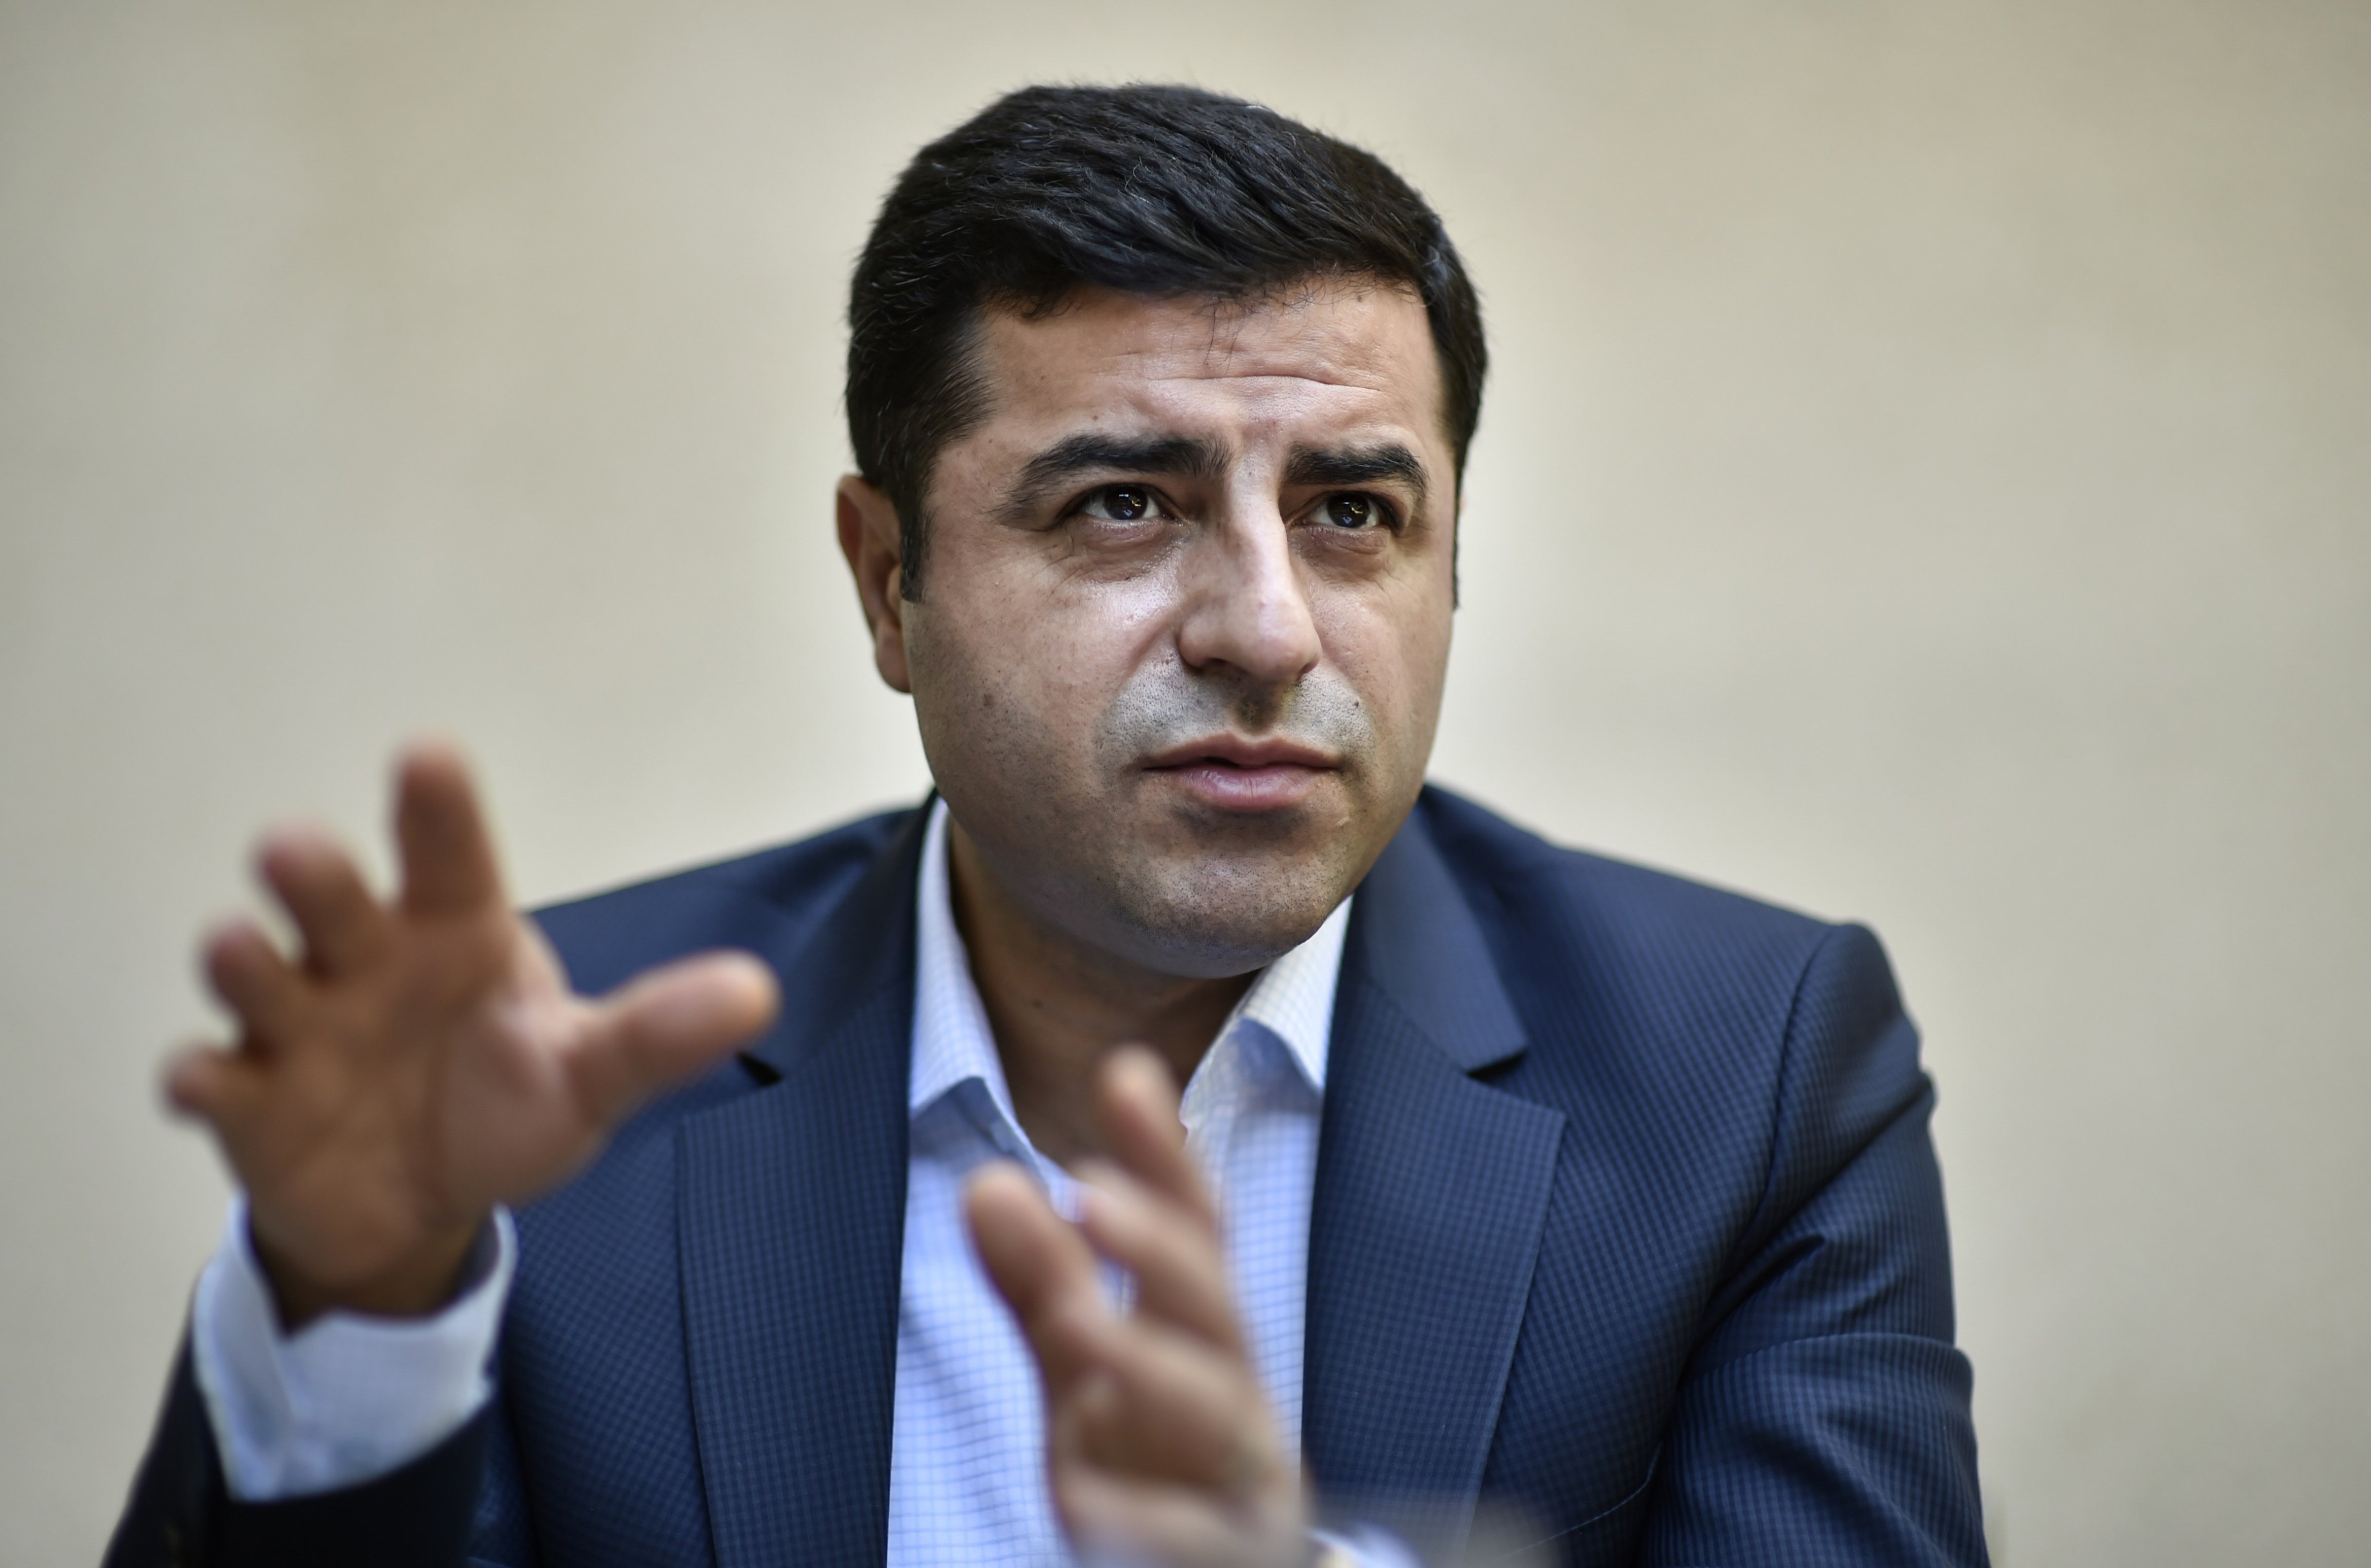 Selahattin Demirtas, co-leader of Turkey's pro-Kurdish People's Democratic Party (HDP), speaks during an interview with AFP in Brussels on Aug. 6, 2015. (John Thys—AFP/Getty Images)